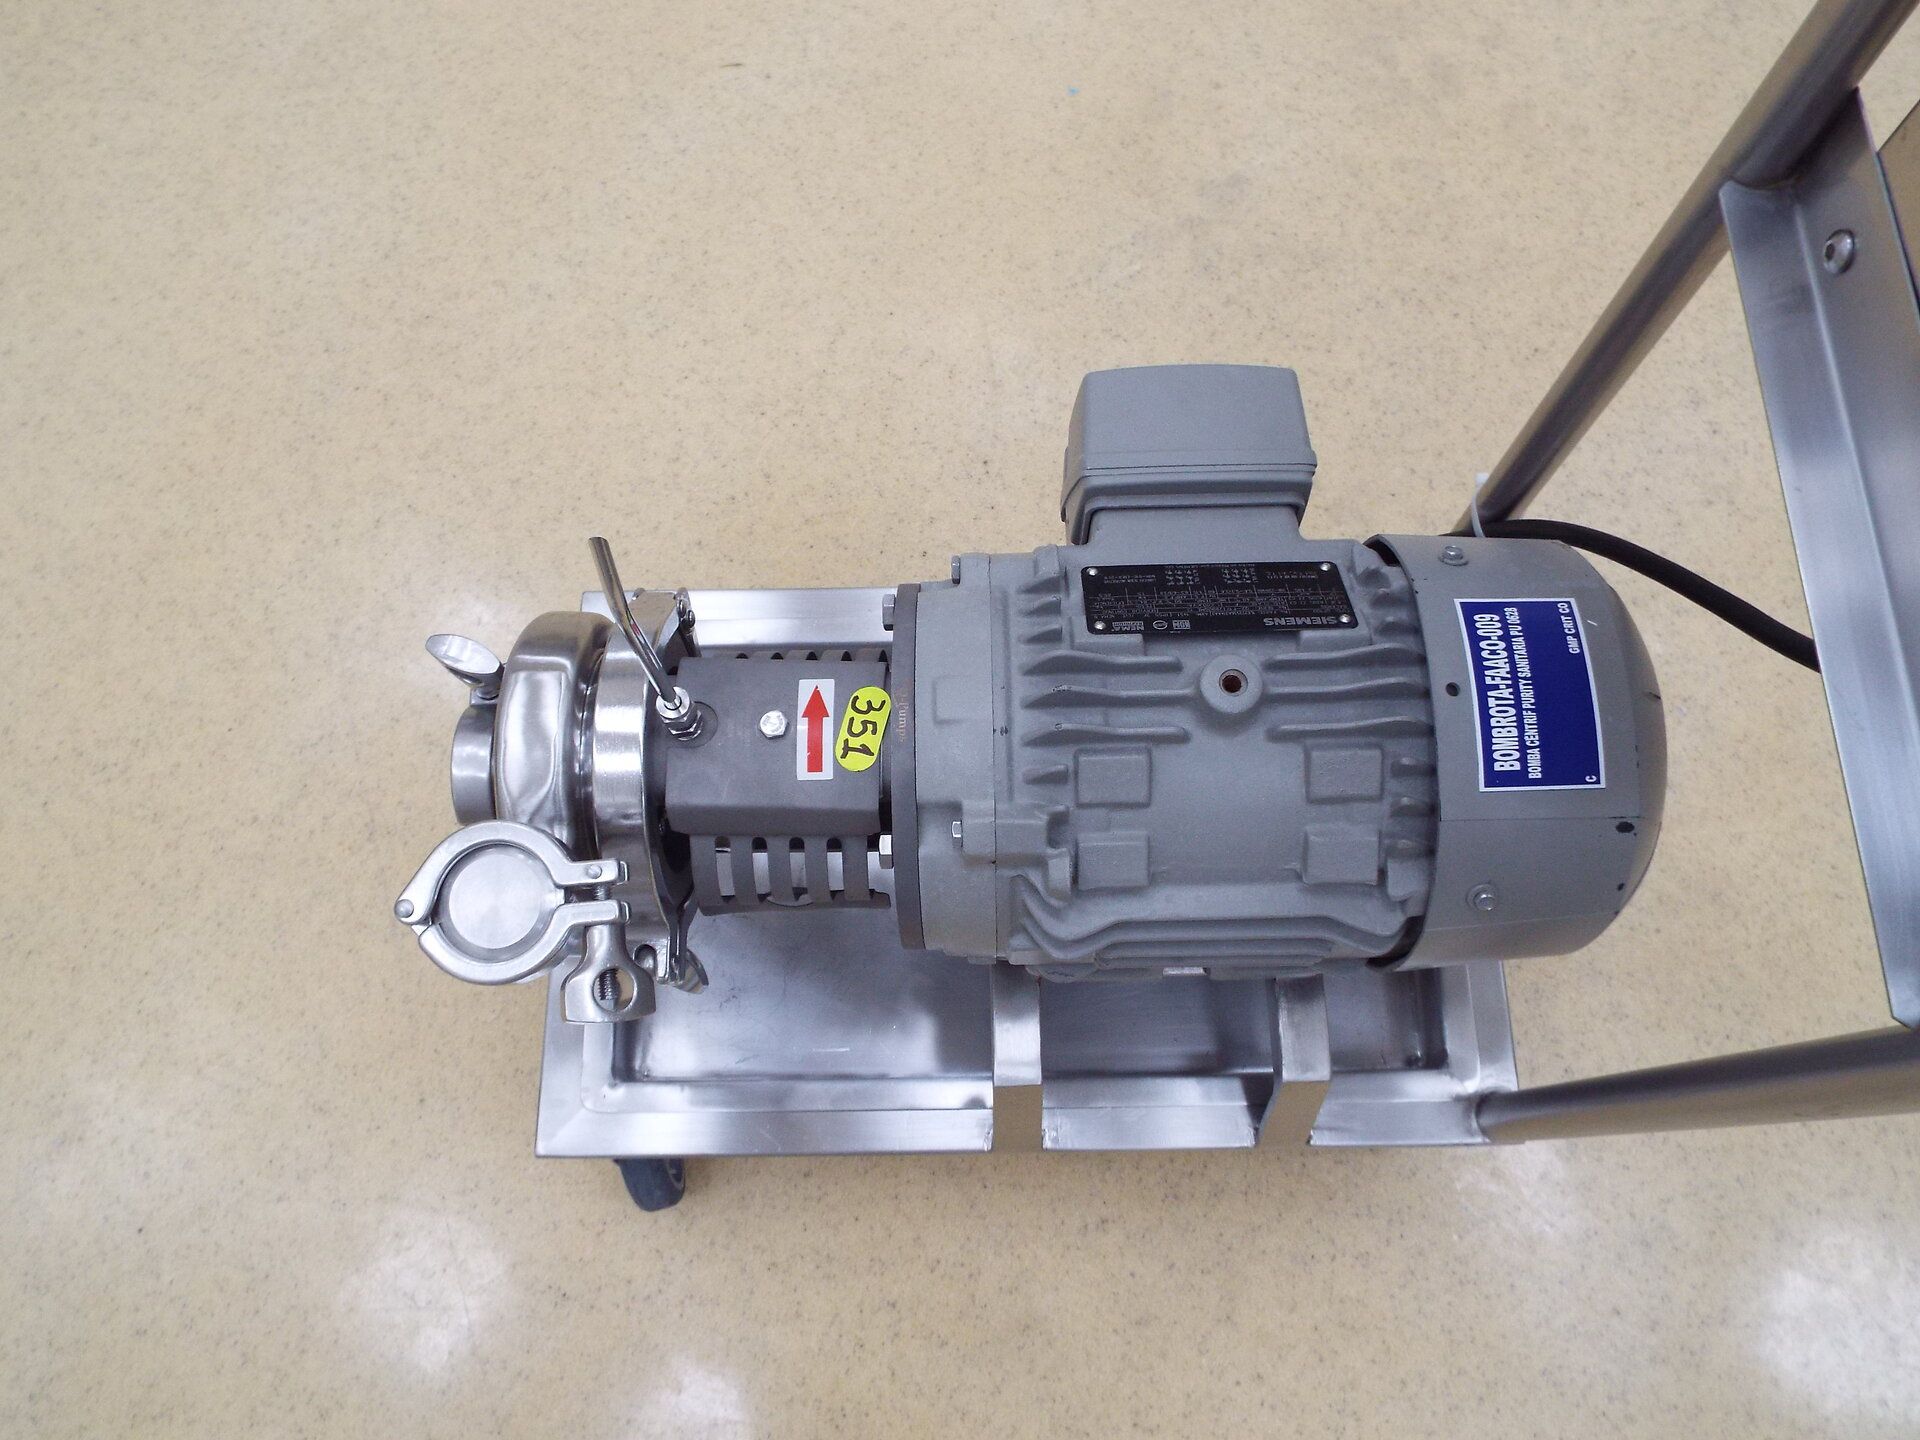 Q pumps 2 HP stainless steel centrifugal pump, 5" diameter impeller, stainless steel base on caster - Image 2 of 4